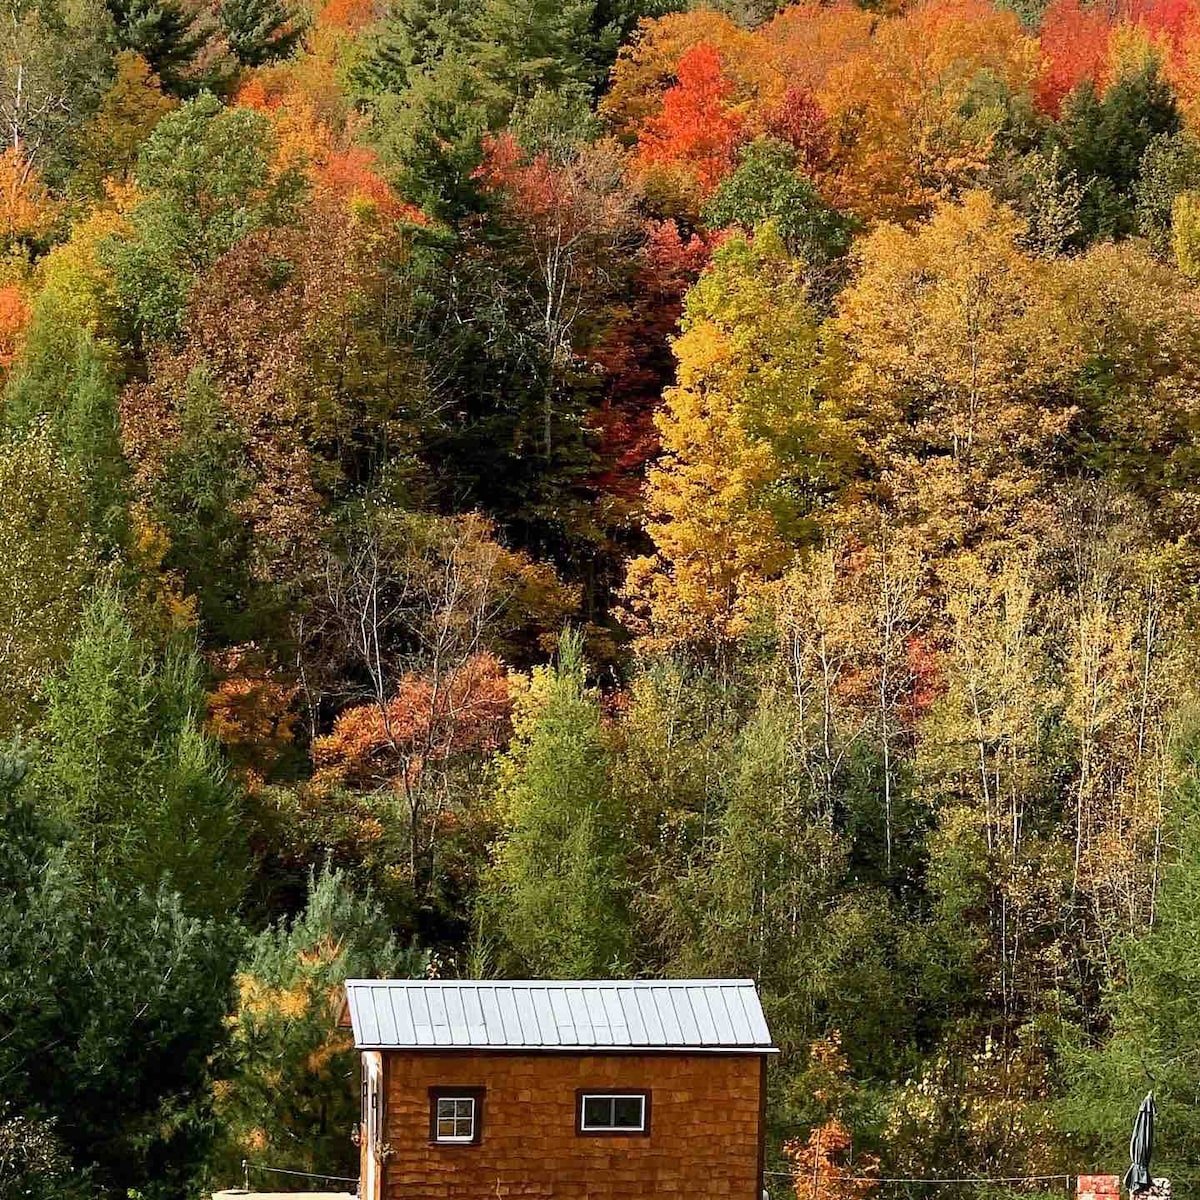 Rustic Vermont Tiny Home - Off Grid